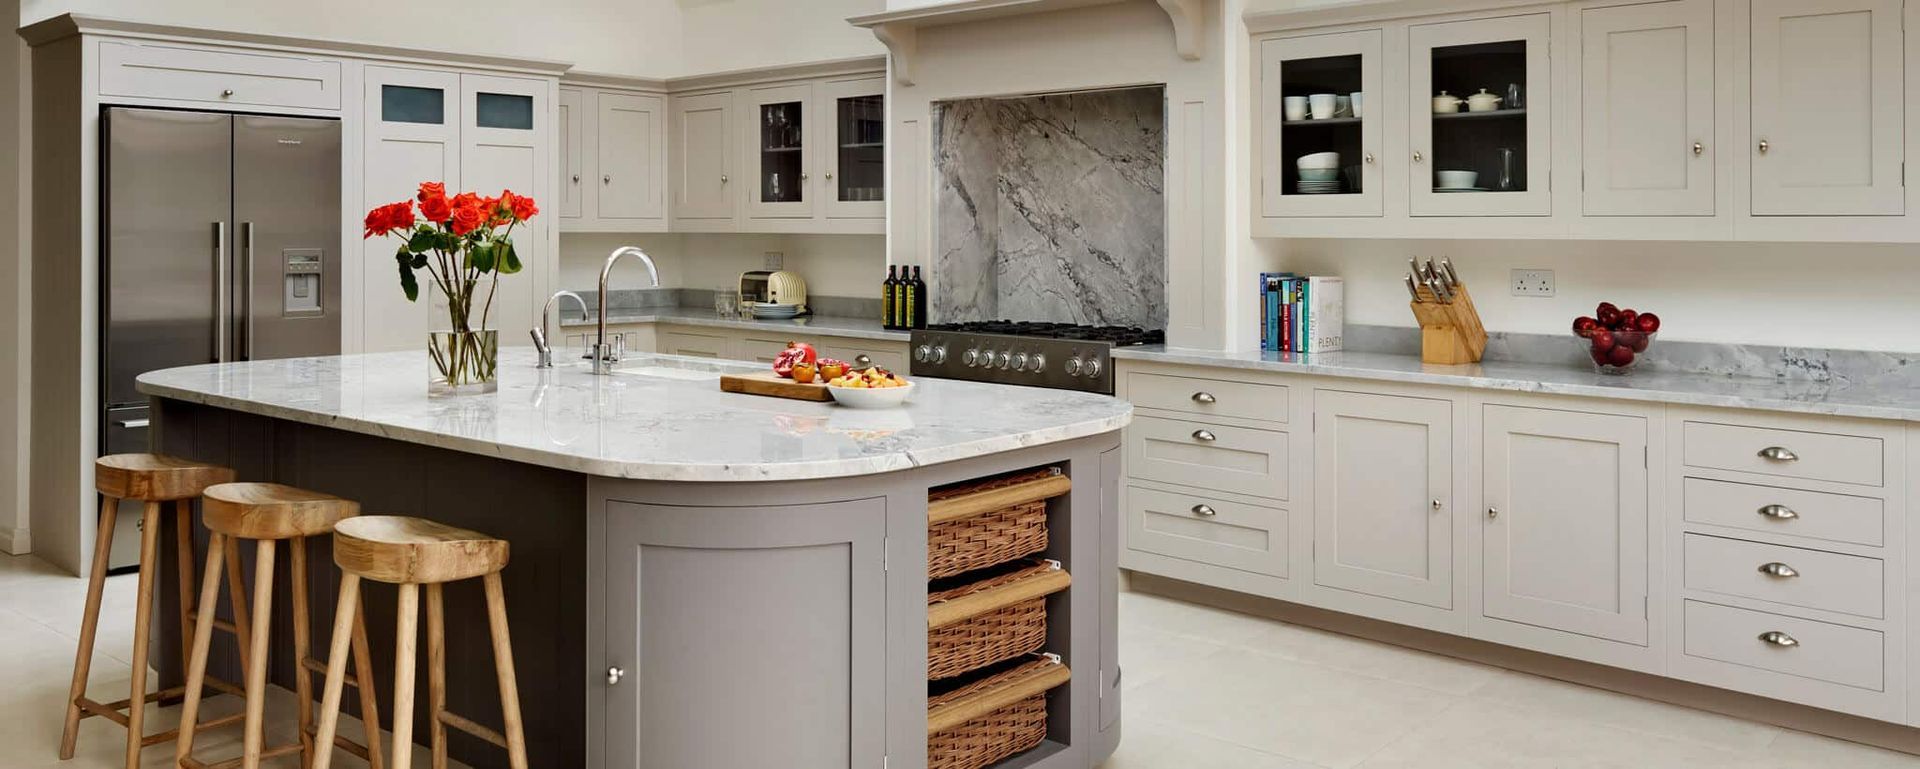 Transform Your Kitchen with Timeless Shaker Style